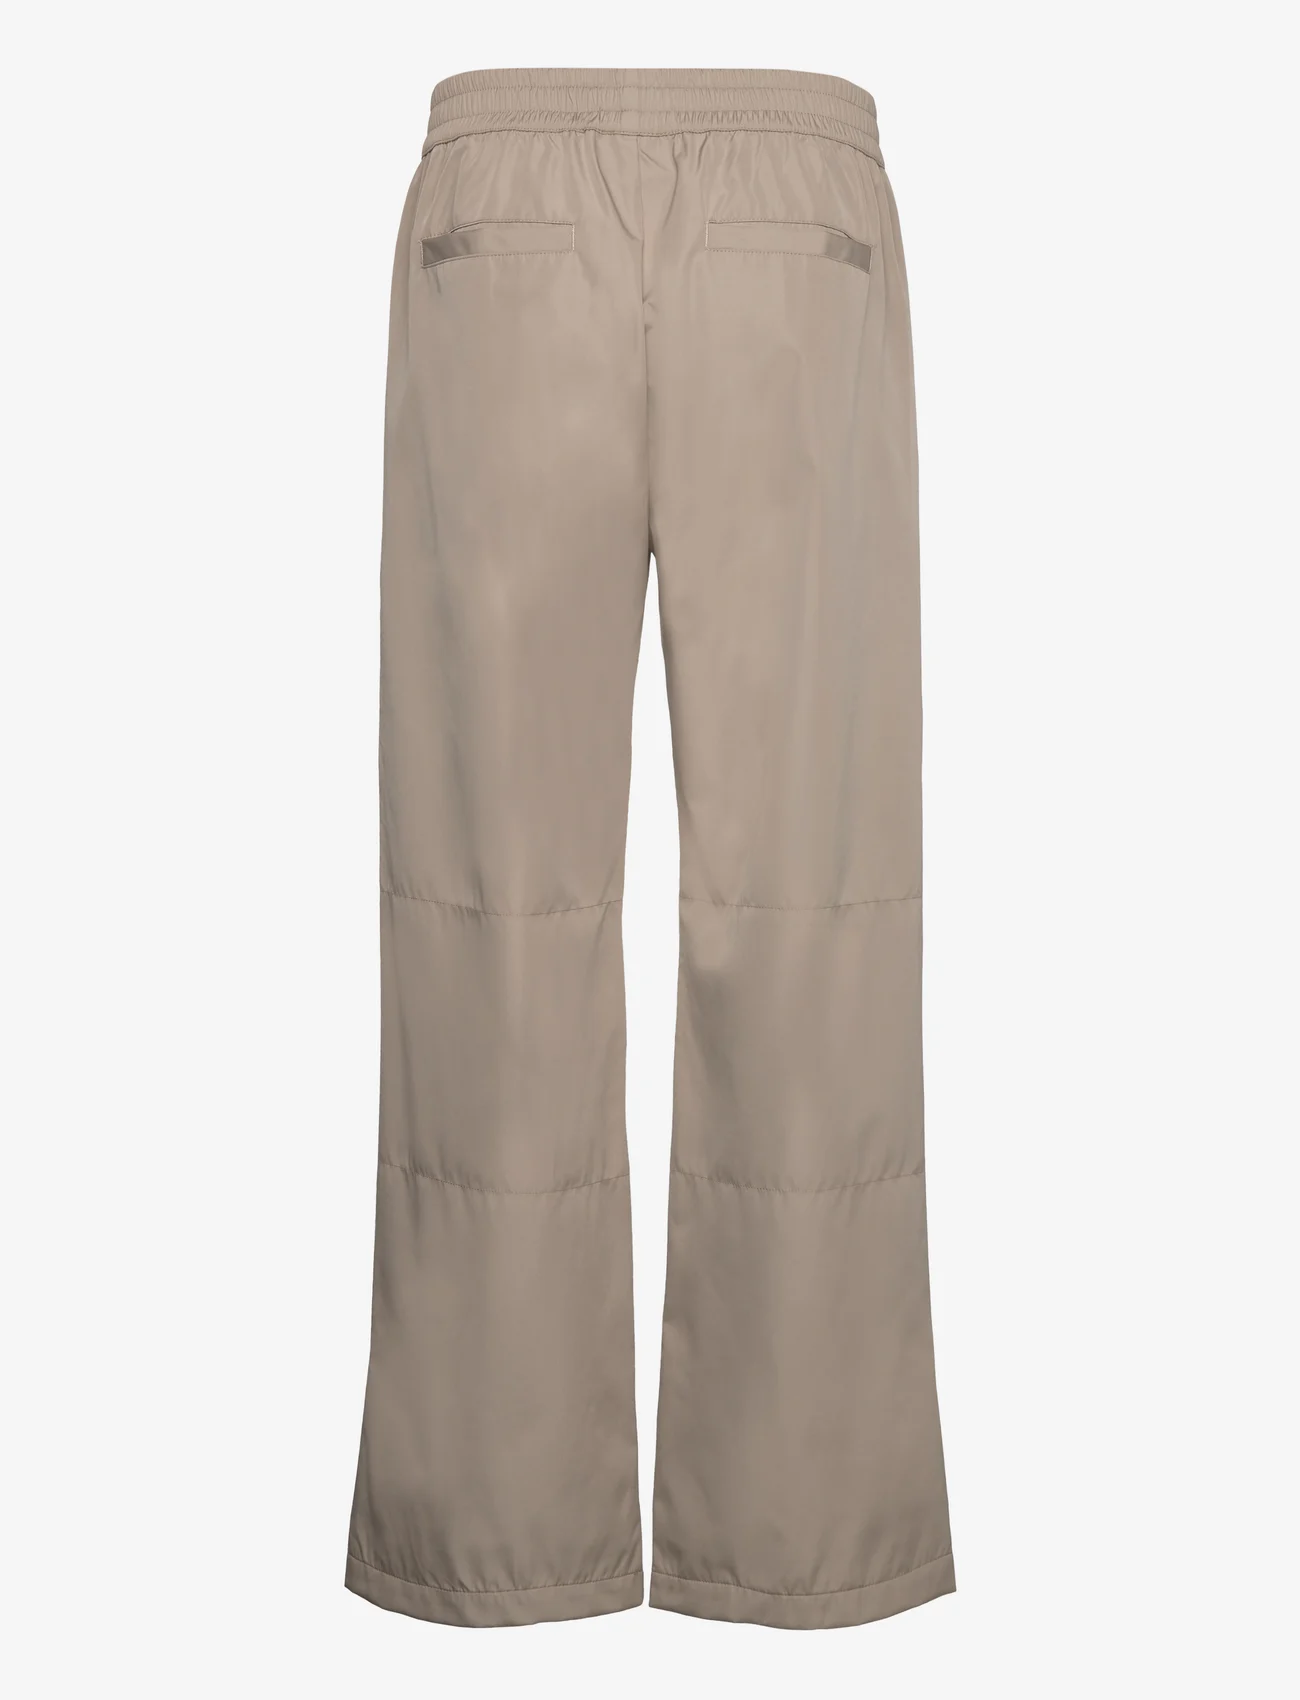 Roots by Han Kjøbenhavn - Relaxed Track Trousers - casual trousers - sand - 1